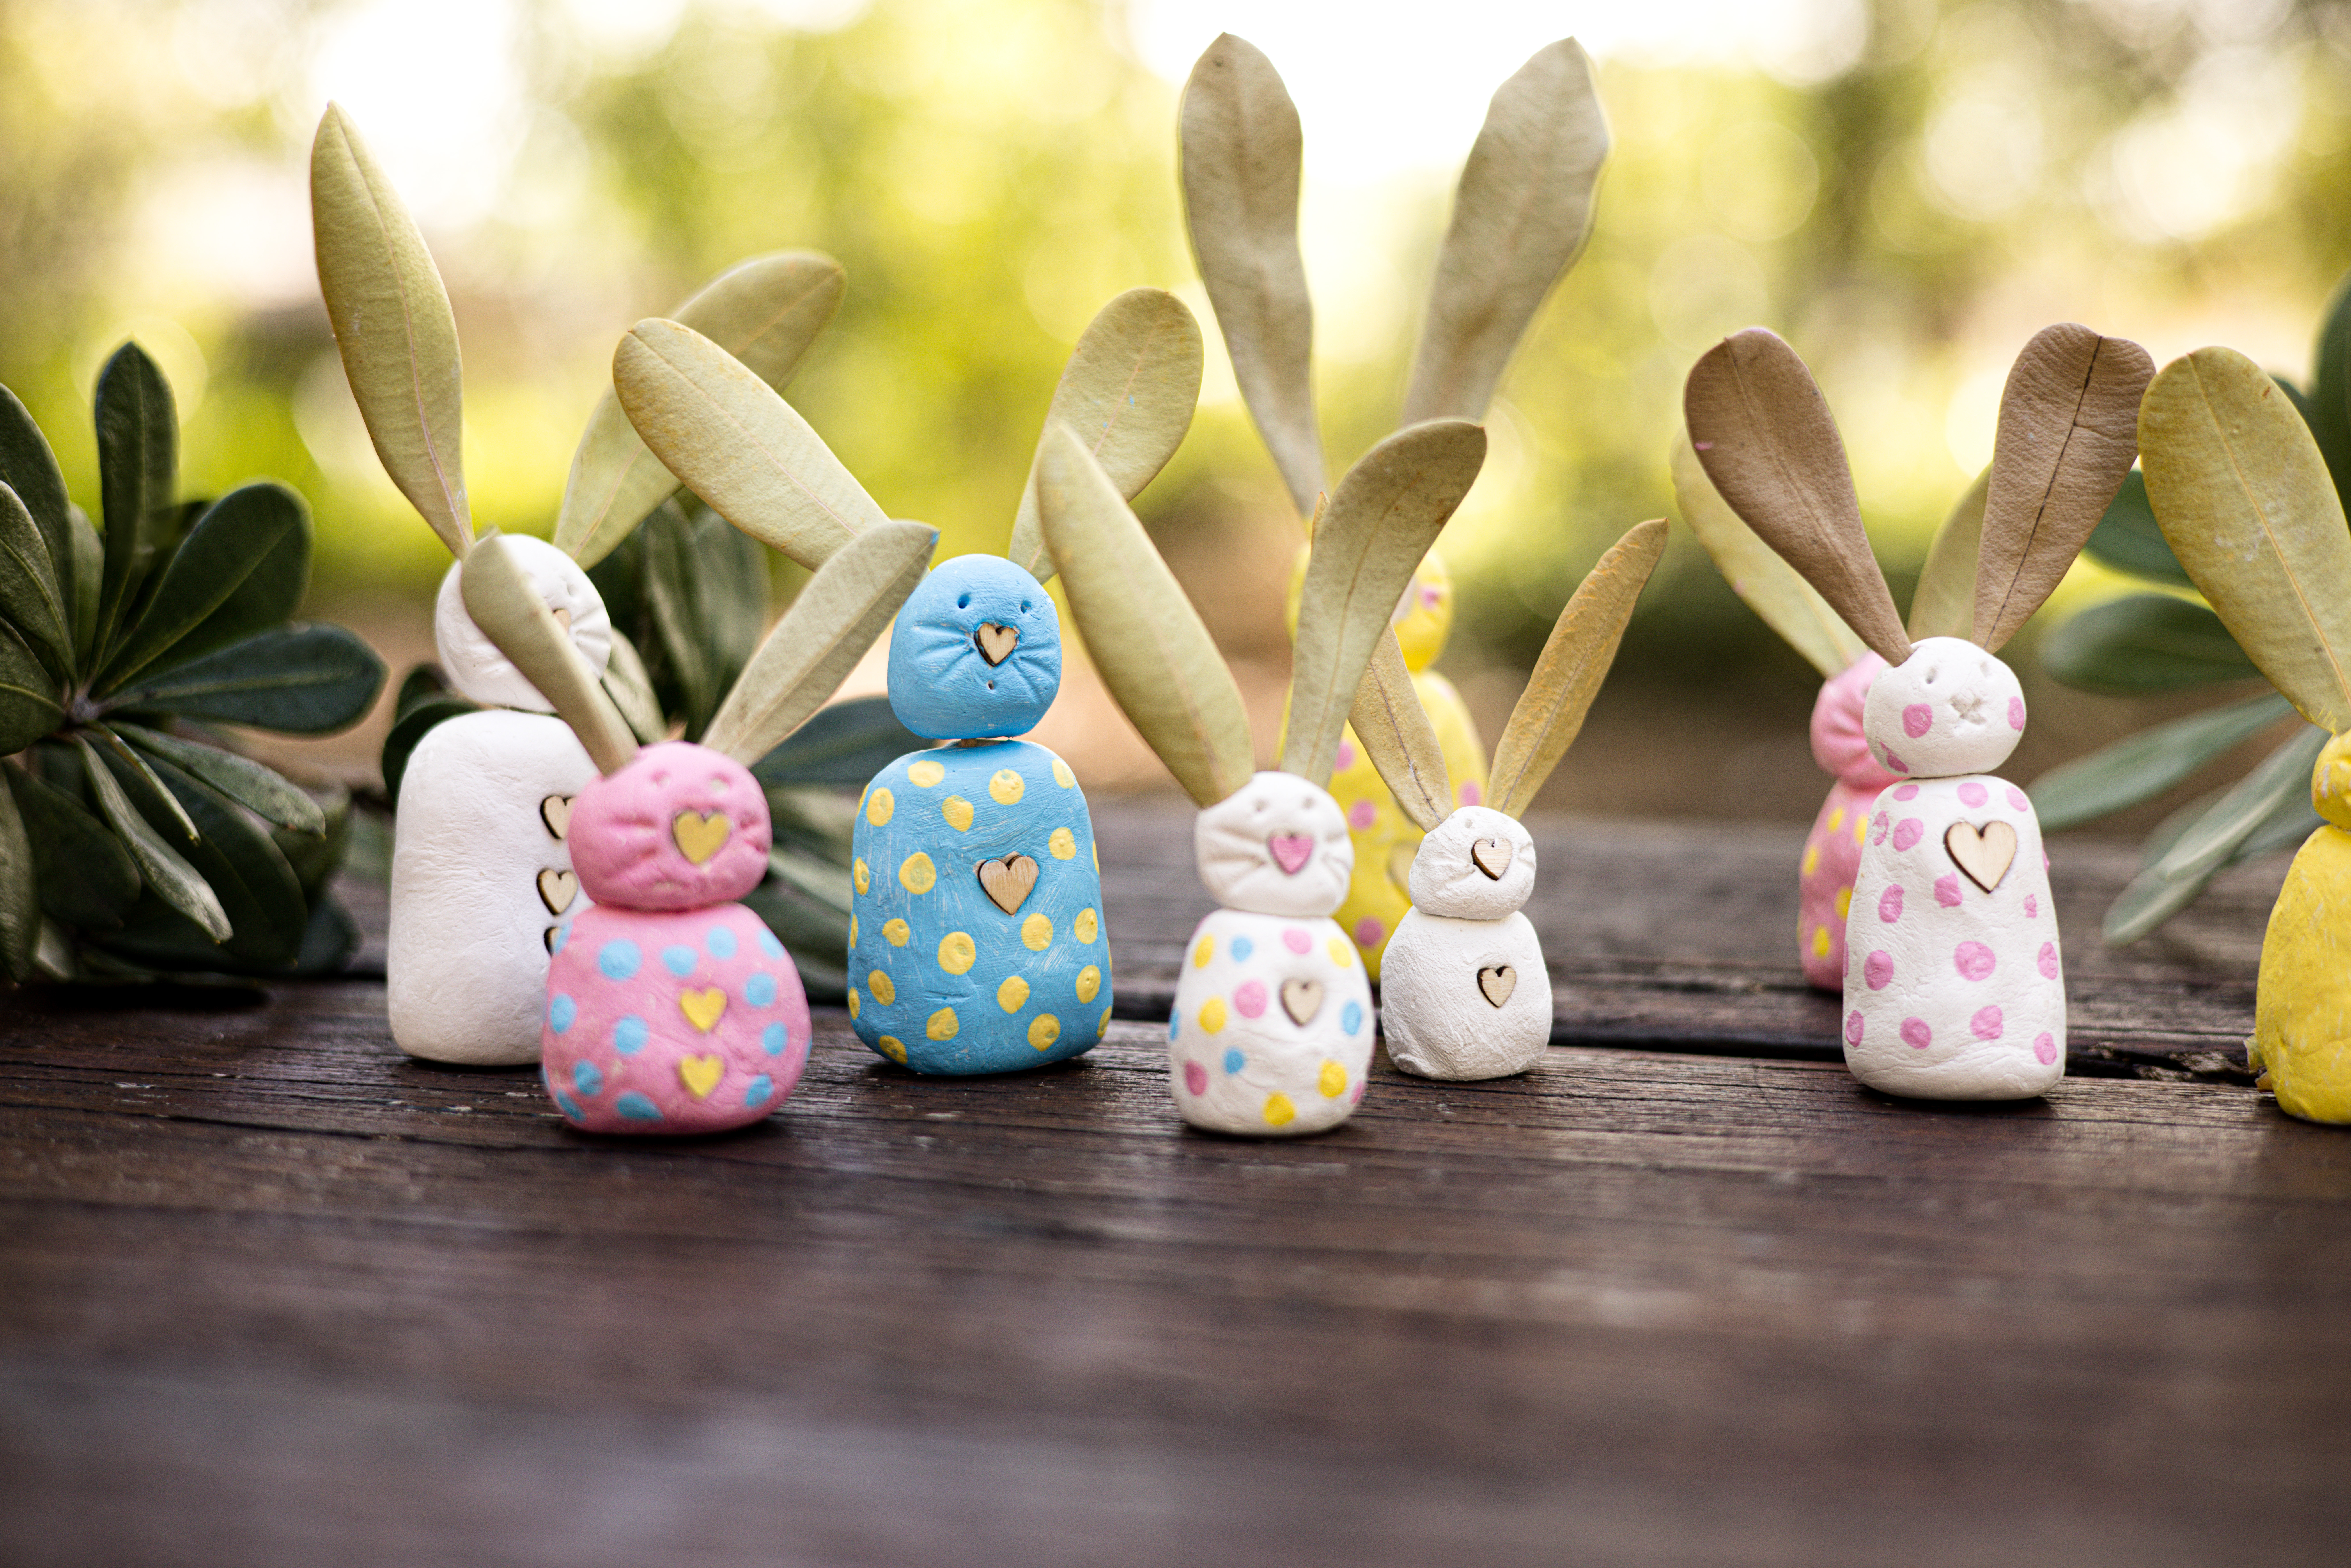 diy clay bunnies lined in the forest